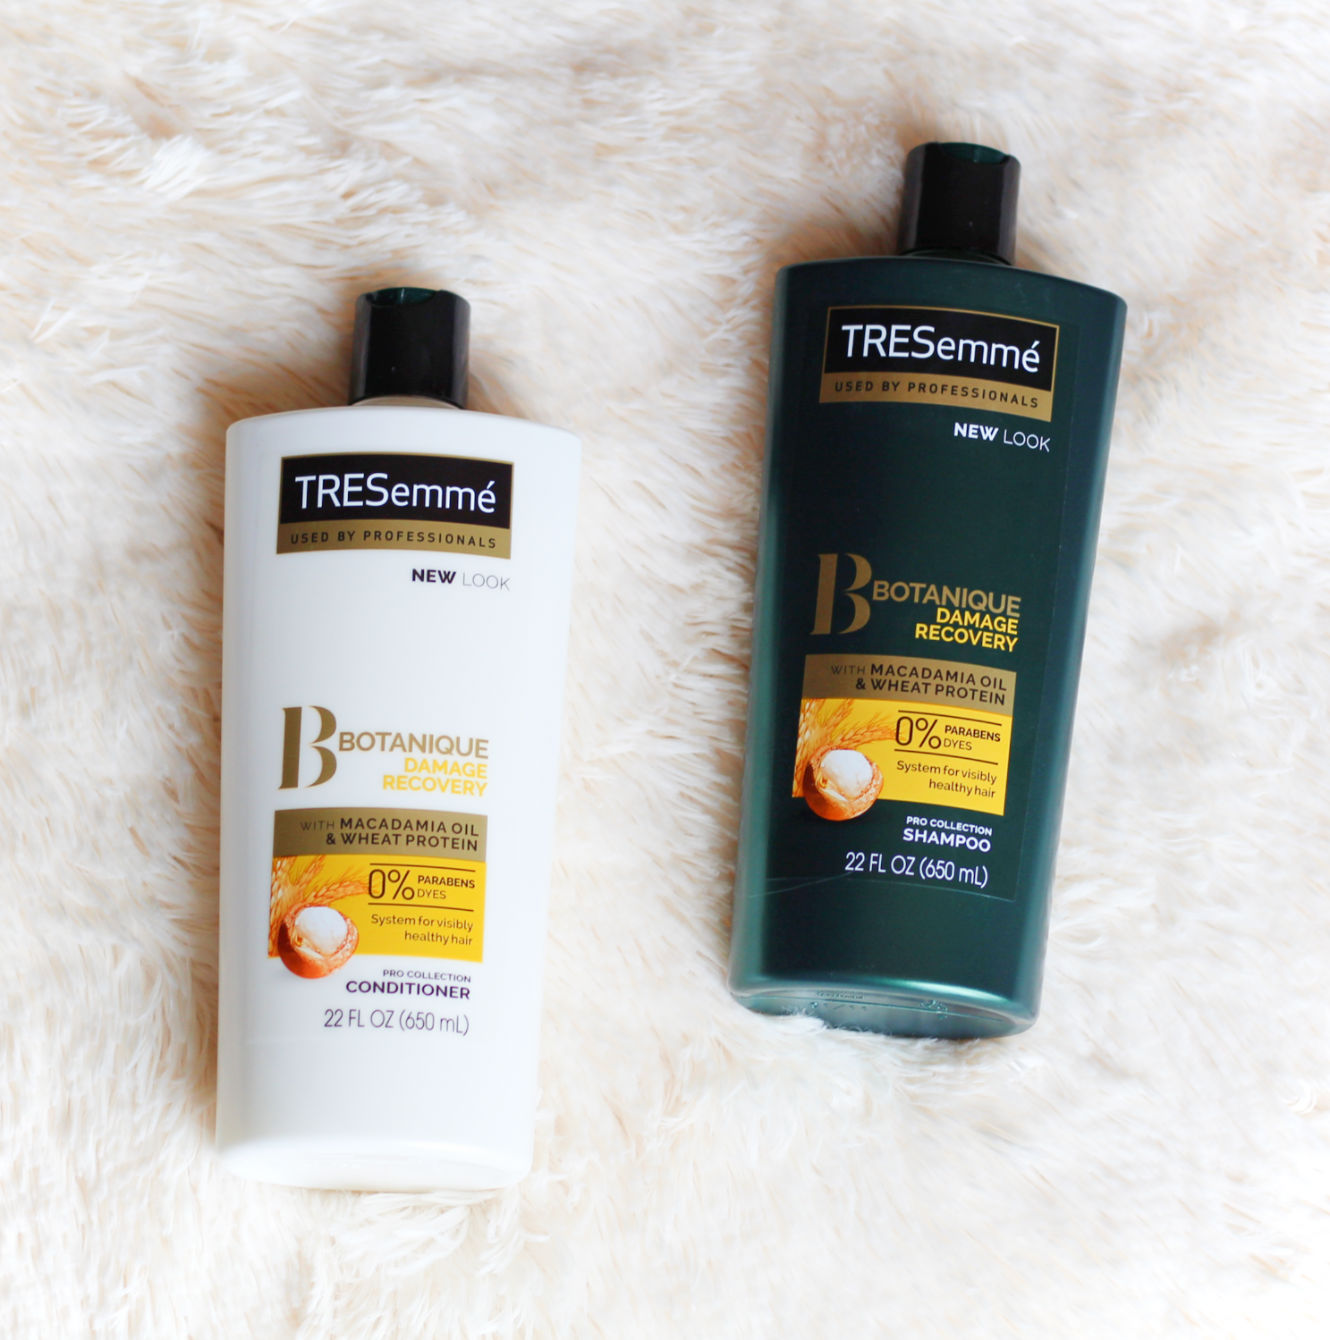 A Good Shampoo and Conditioner